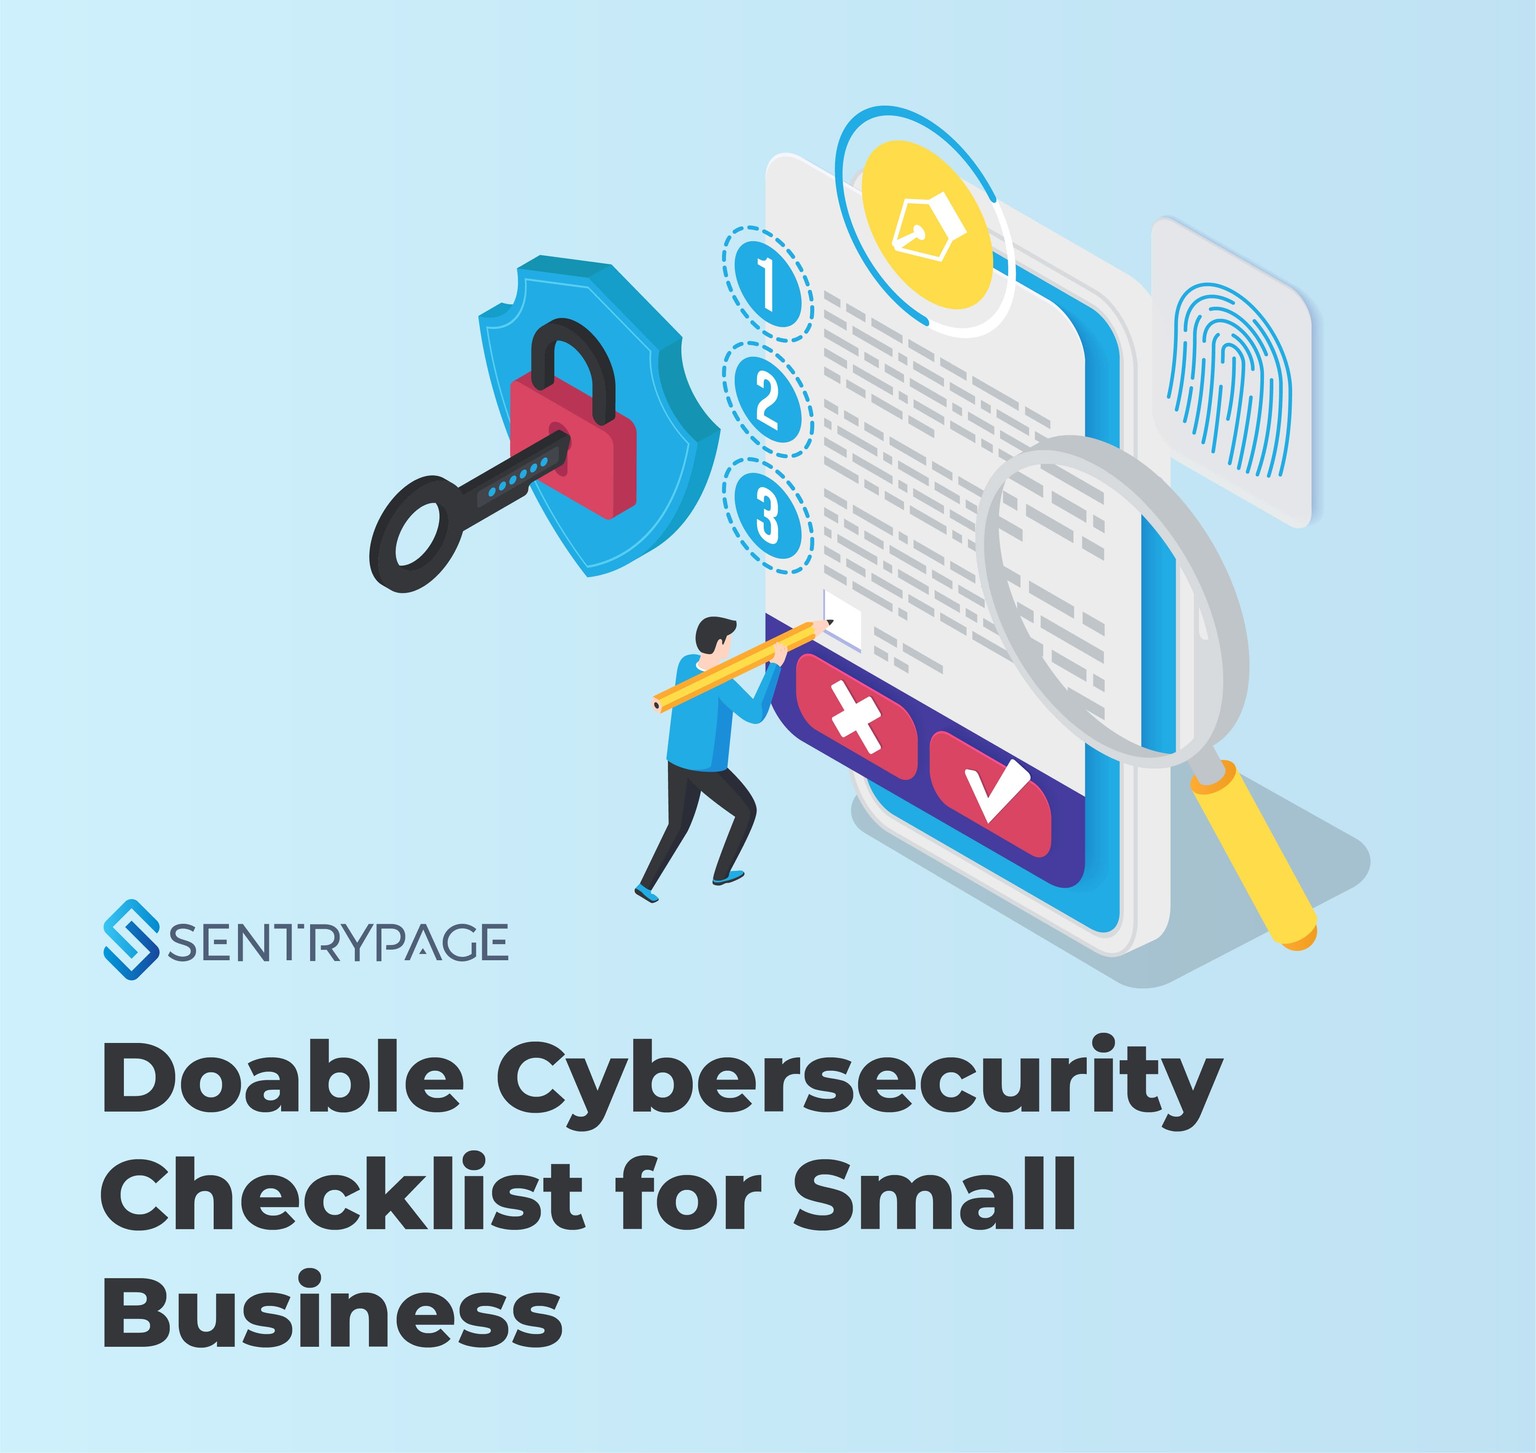 Doable Cybersecurity Checklist for Small Business